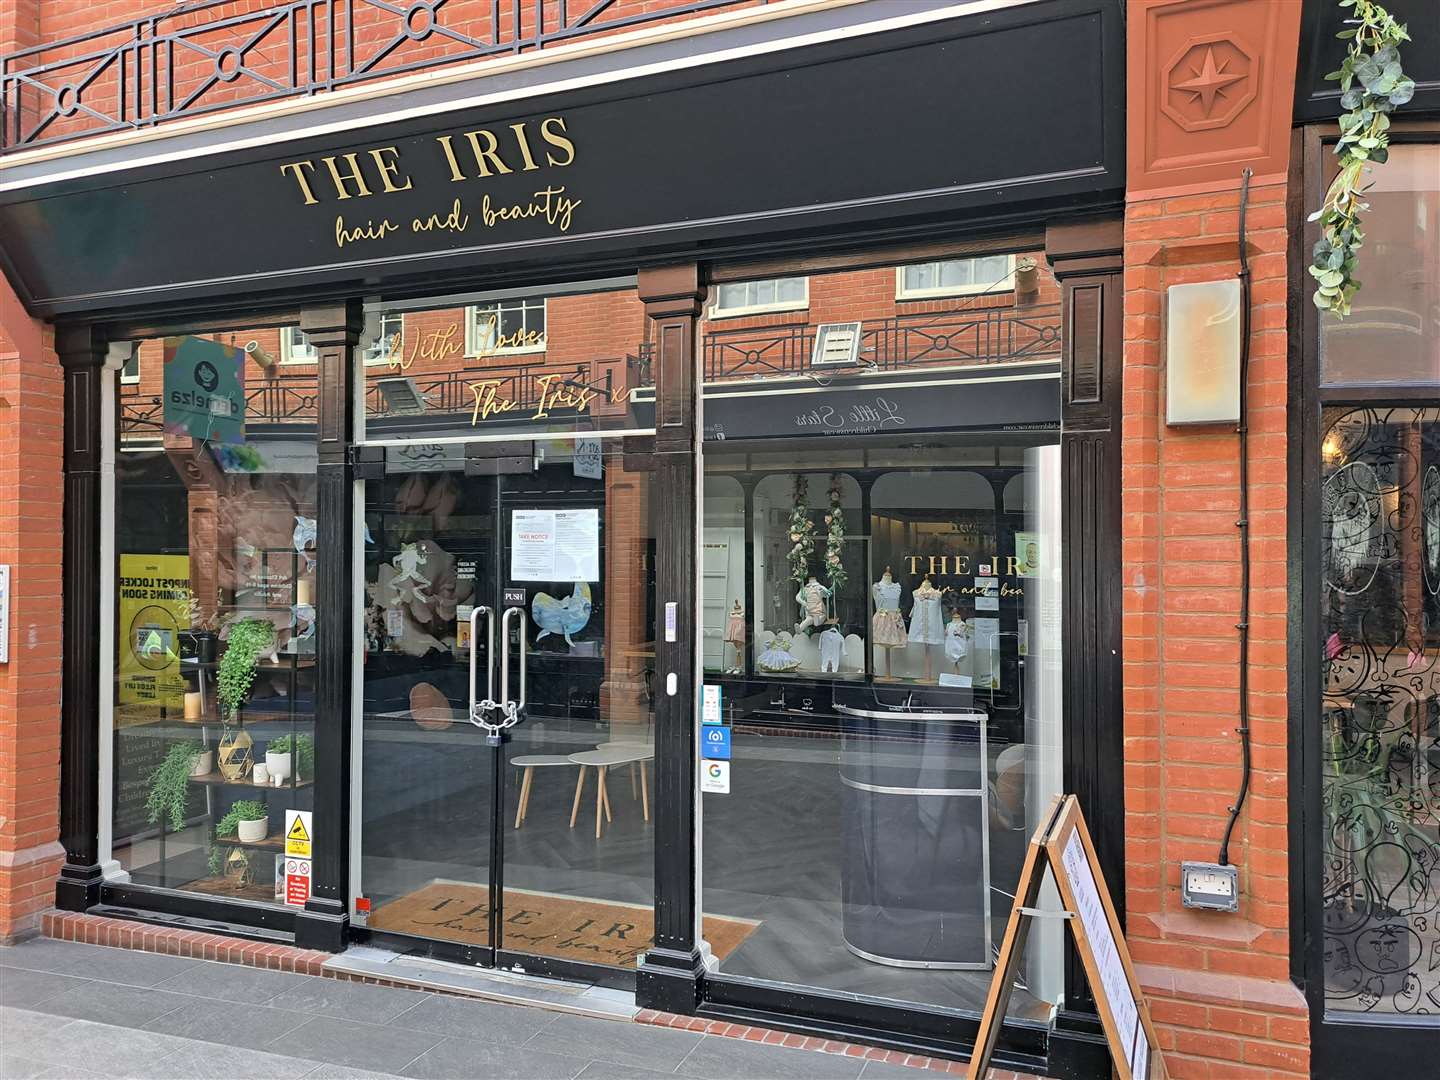 Another business has closed in the Royal Star Arcade - The Iris Hair and Beauty Salon